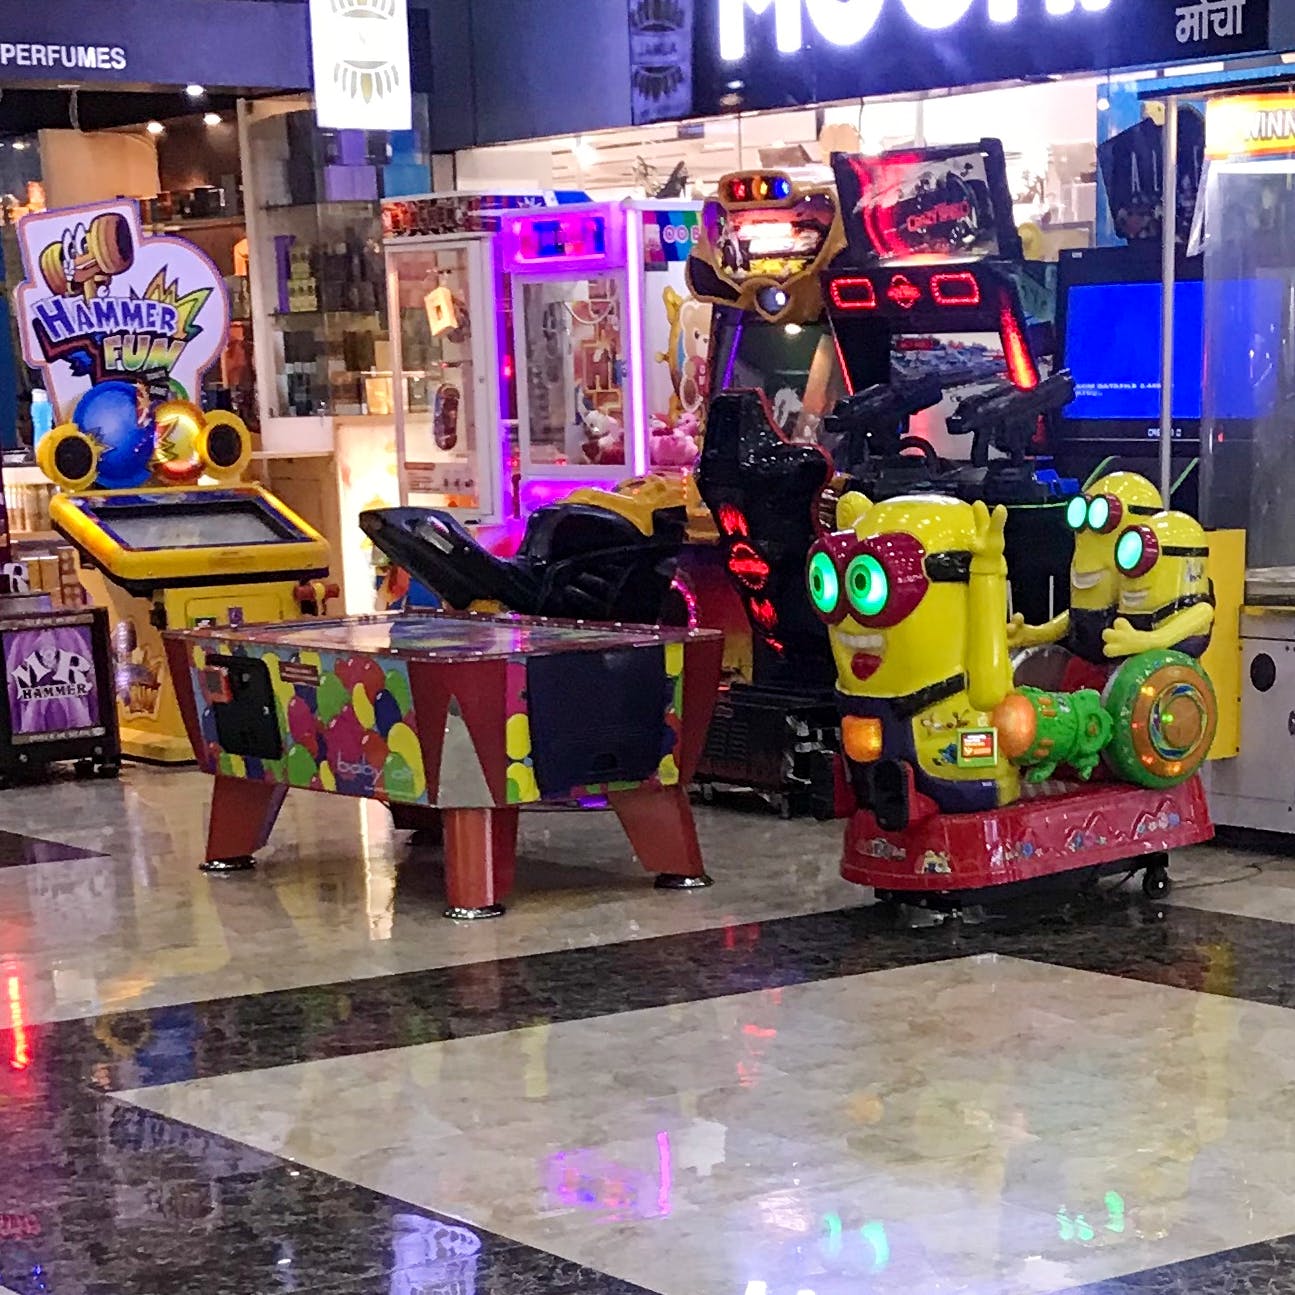 Games,Technology,Fun,Recreation,Electronic device,Night,Arcade game,Shopping mall,Toy,Square